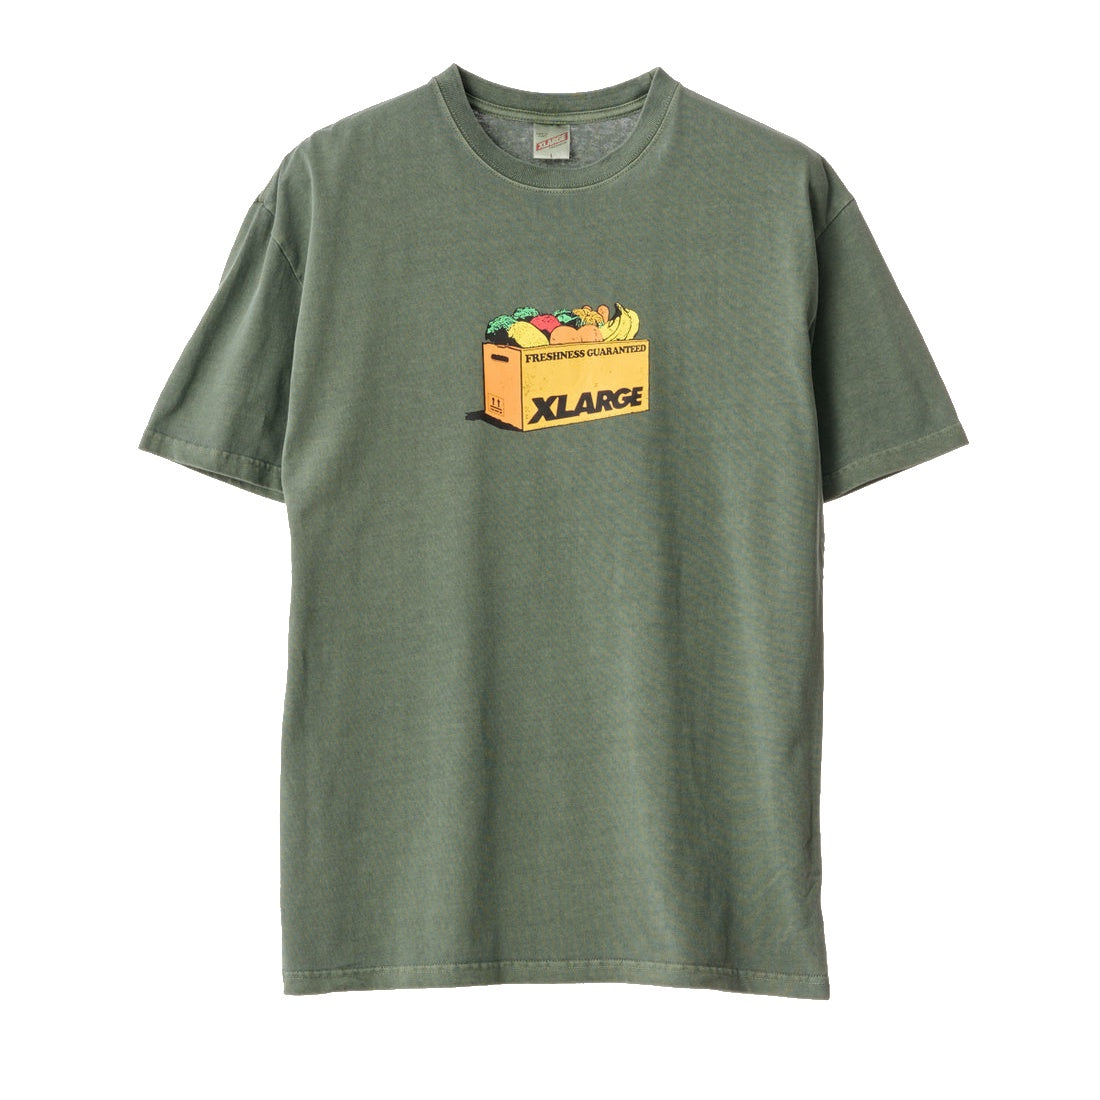 XLARGE - FRESHNESS SS TEE - PIGMENT FOREST